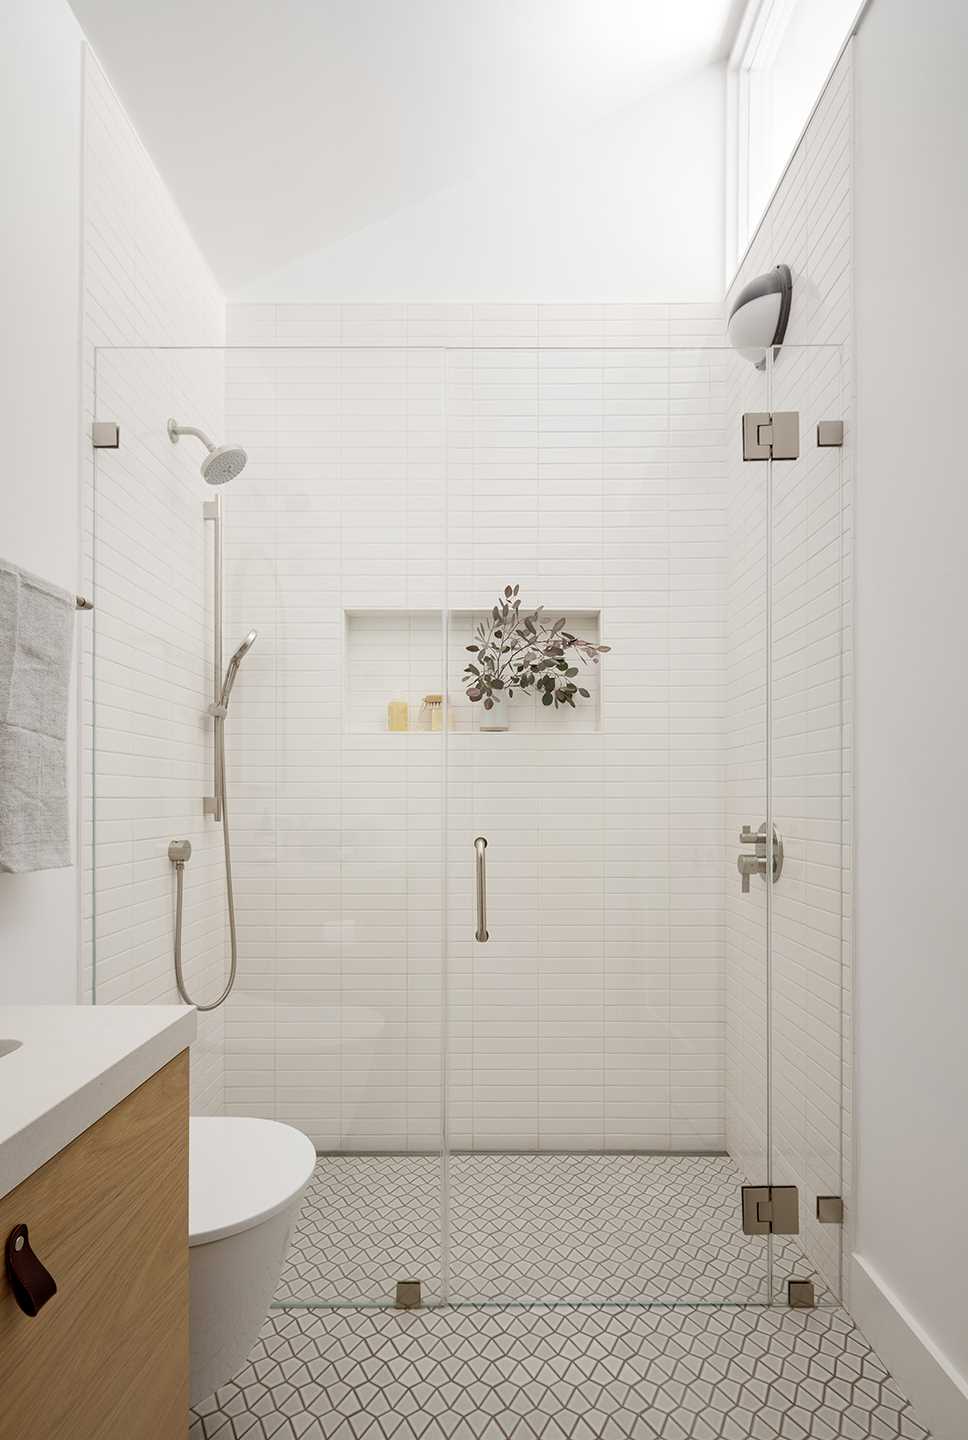 A modern shower with a simple color palette and shelving niche.